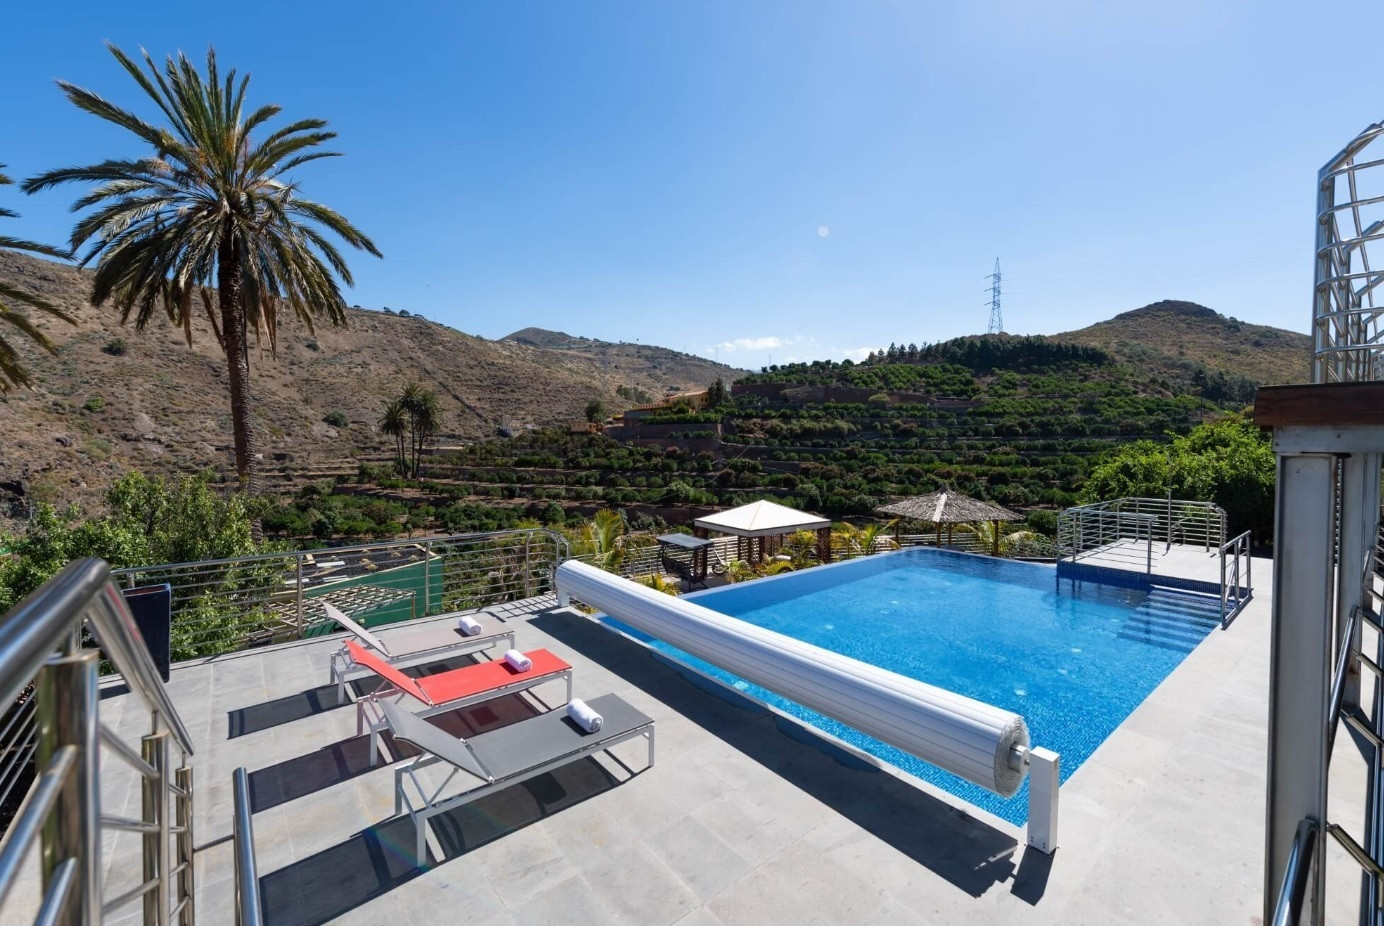 Finca Telde is the perfect hide-away for large groups. With private pool and nice hiking trails in Telde, Gran Canaria